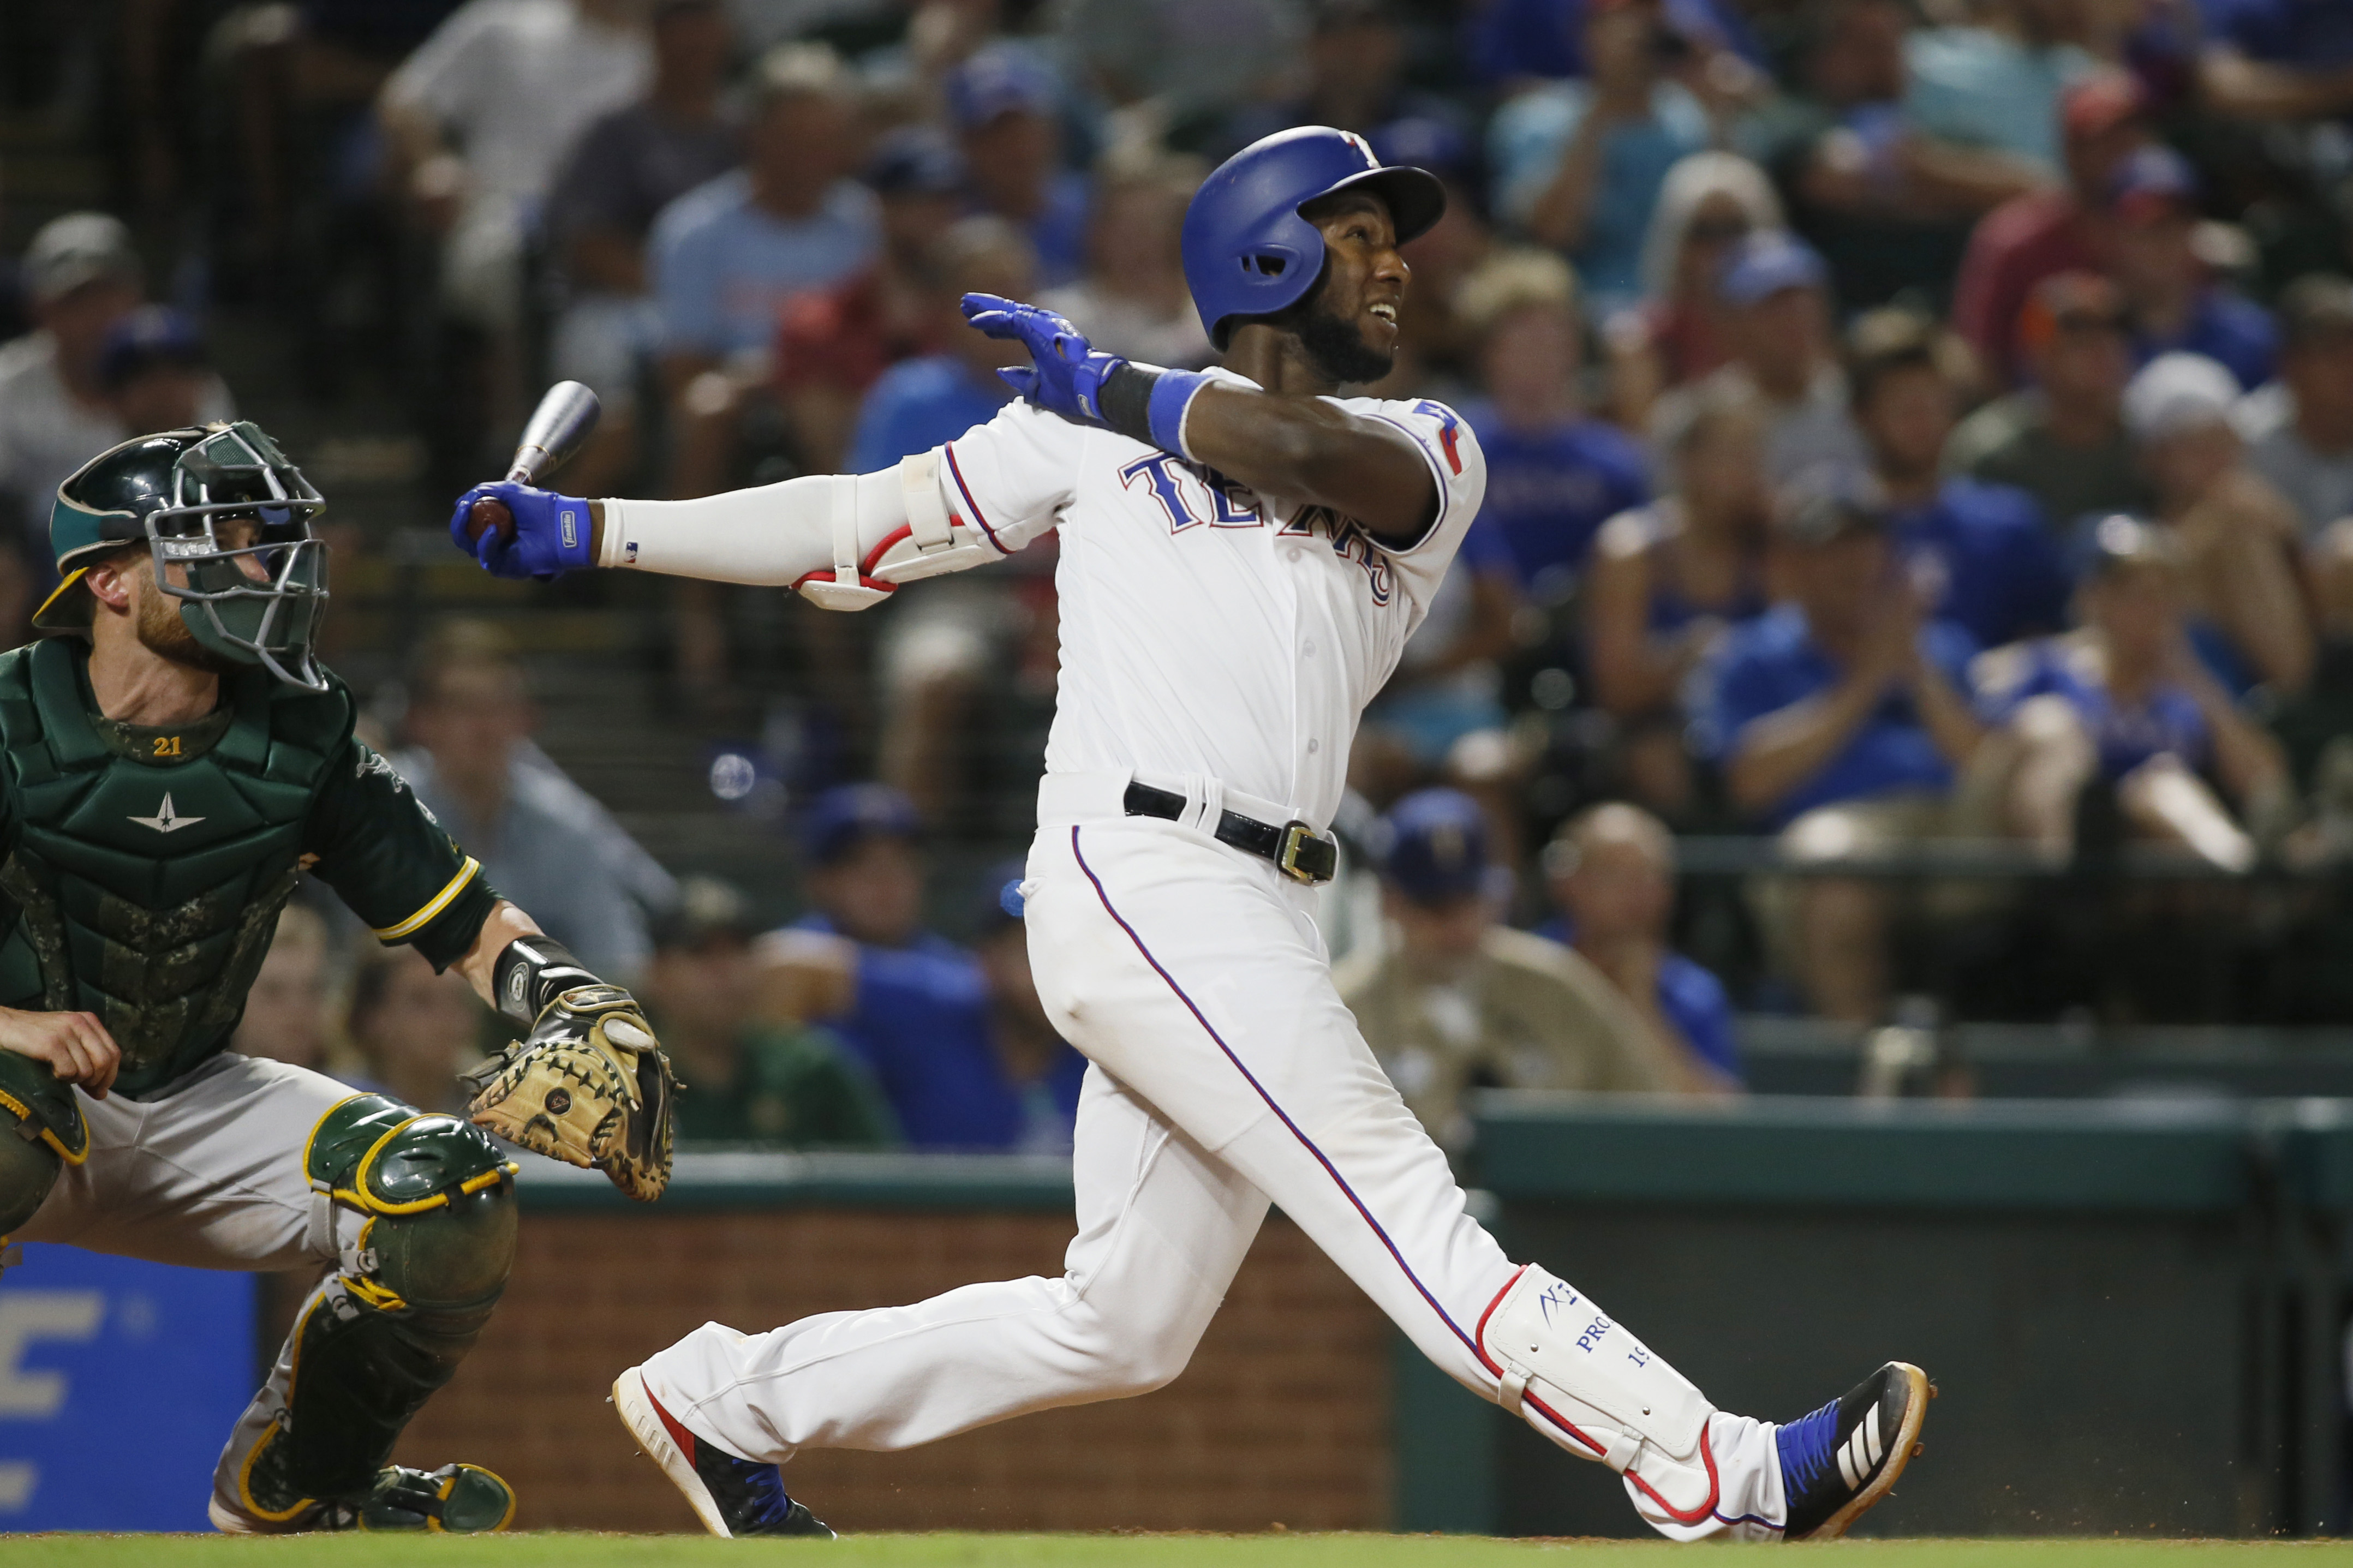 PHOTOS: Colon ties MLB history, Rangers bats stay red hot in Rangers 8-2 win over Athletics